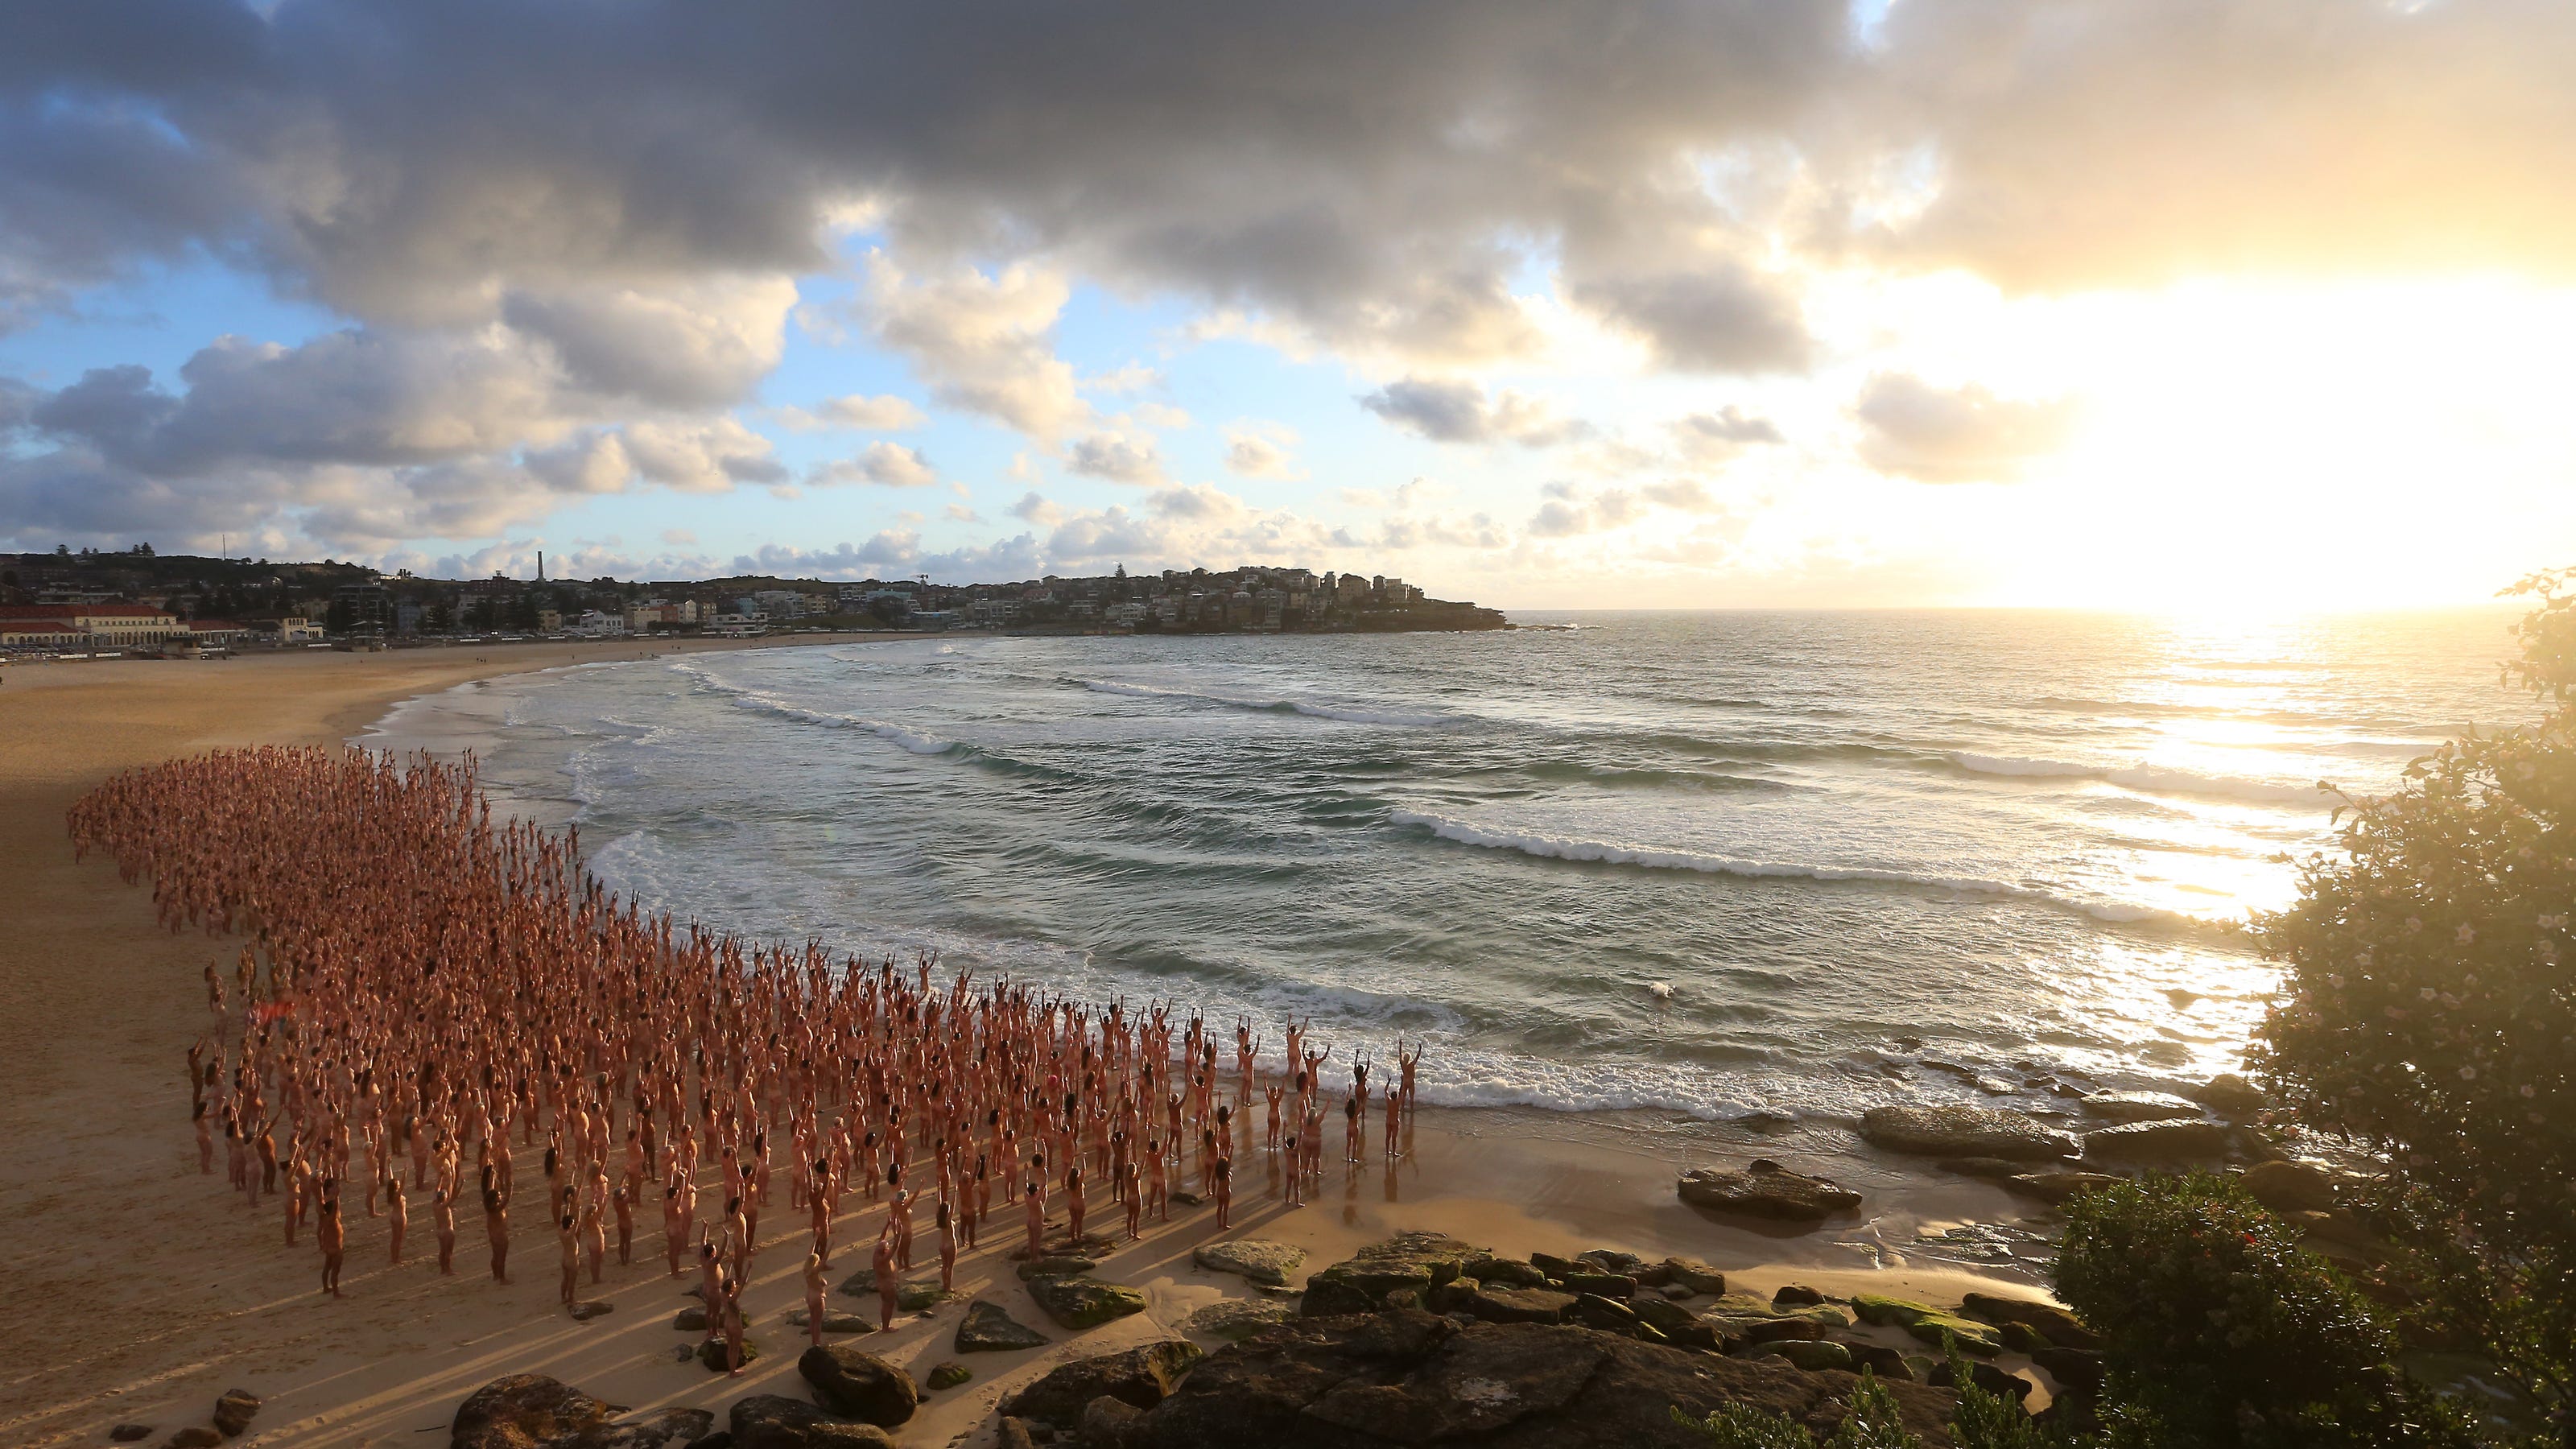 Beach Strip Nude - Thousands pose nude at Australian beach in Spencer Tunick photo shoot